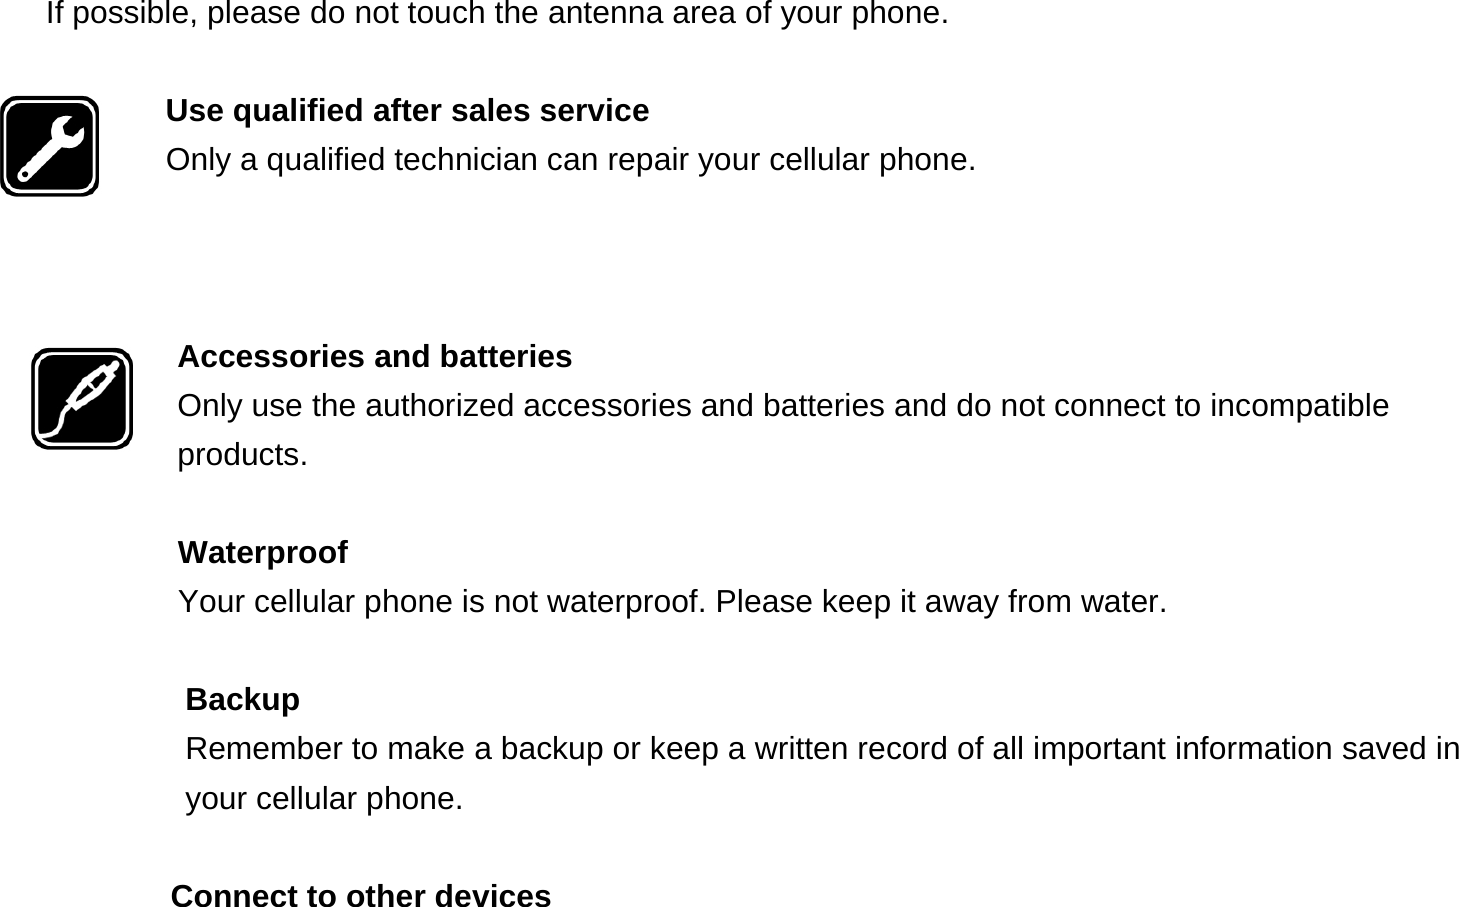 If possible, please do not touch the antenna area of your phone.  Use qualified after sales service Only a qualified technician can repair your cellular phone.    Accessories and batteries Only use the authorized accessories and batteries and do not connect to incompatible products.  Waterproof Your cellular phone is not waterproof. Please keep it away from water.  Backup Remember to make a backup or keep a written record of all important information saved in your cellular phone.  Connect to other devices 